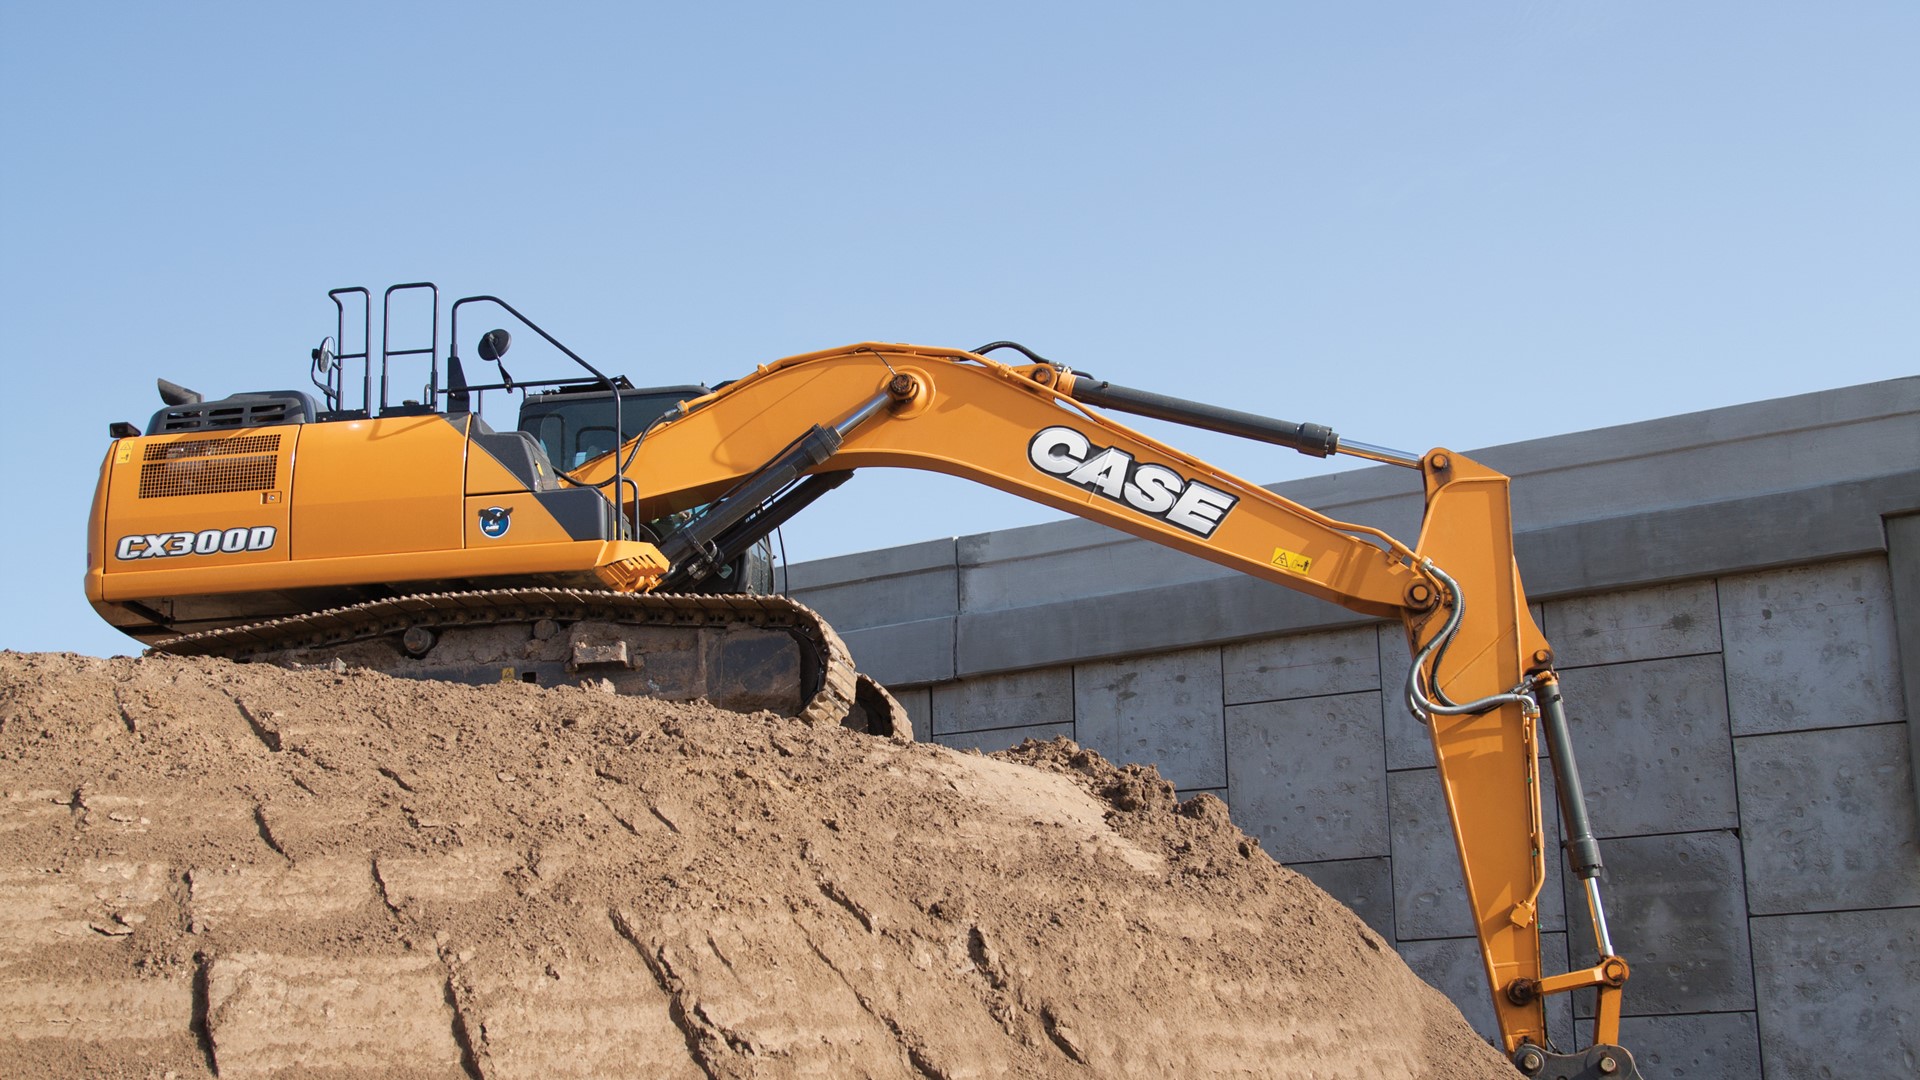 New Excavator Proves to be Jack-of-all-Trades for North Carolina Contractor